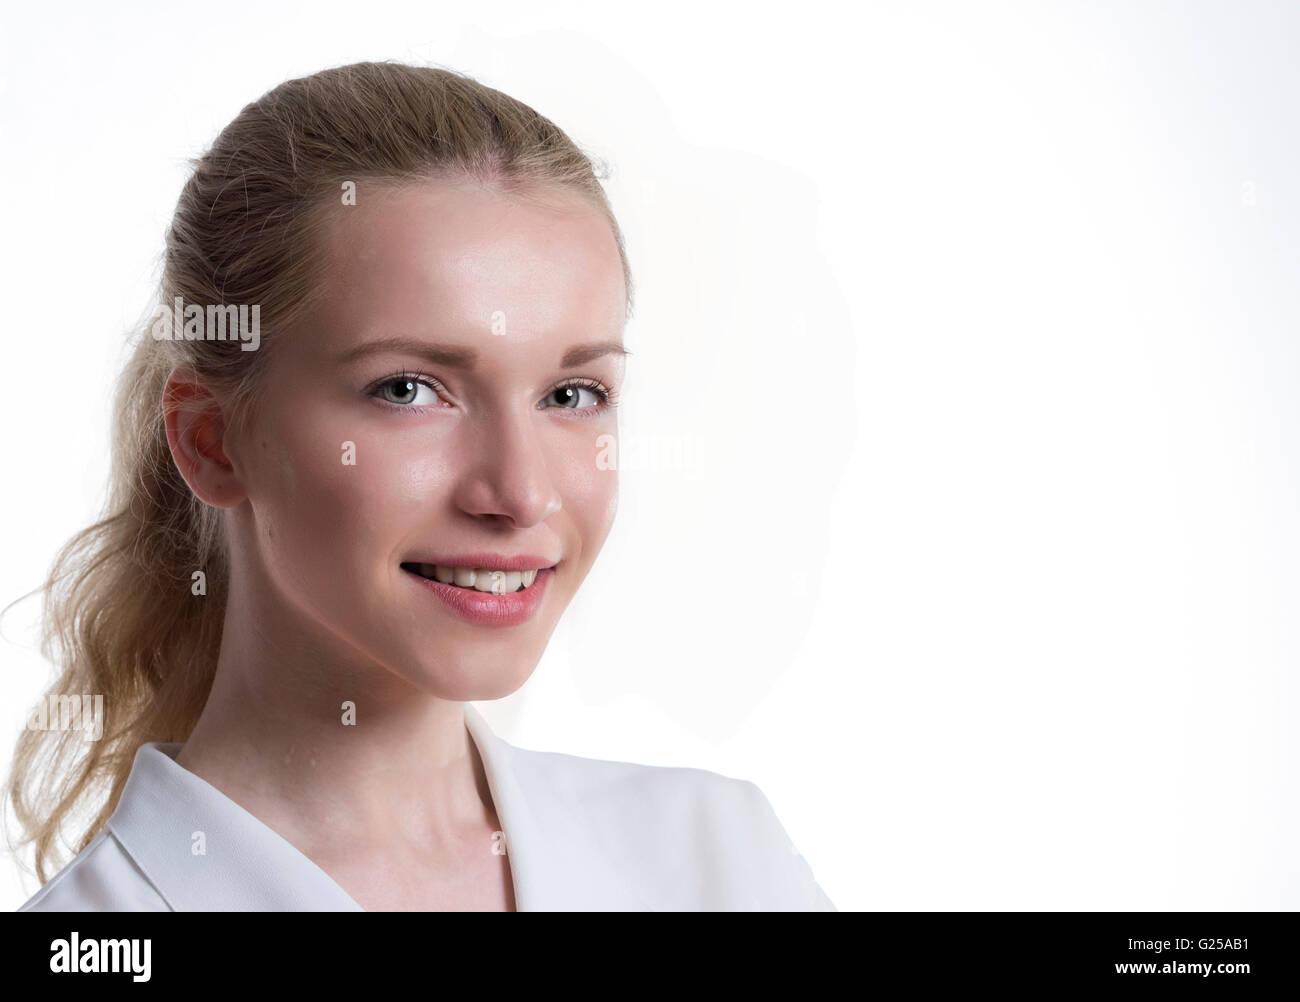 Portrait of a smiling woman Stock Photo